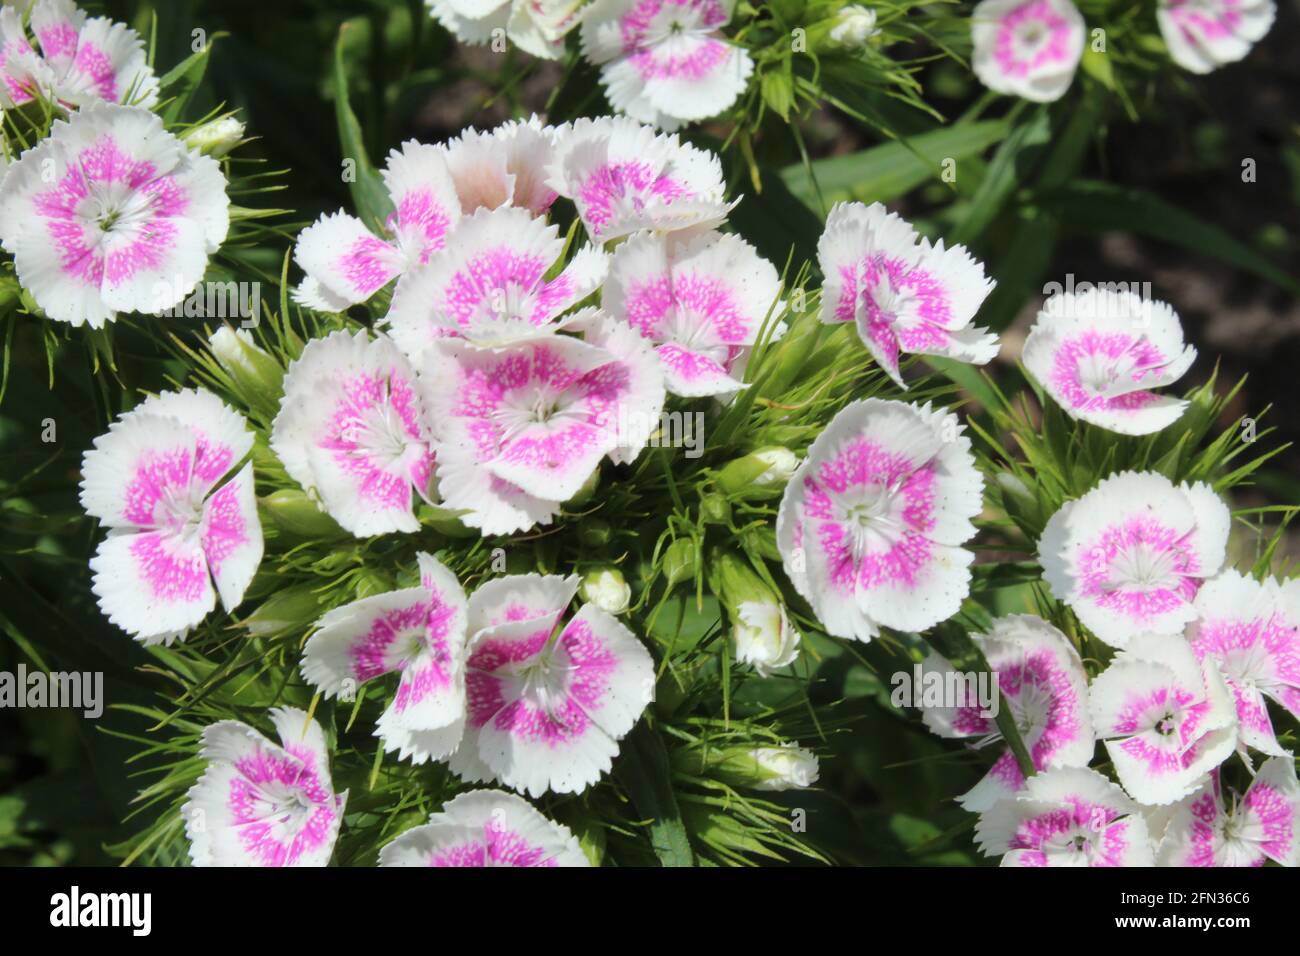 Chinese astra phlox red burgundy with a light white middle. Spring flowers, flowering on a green background. Stock Photo